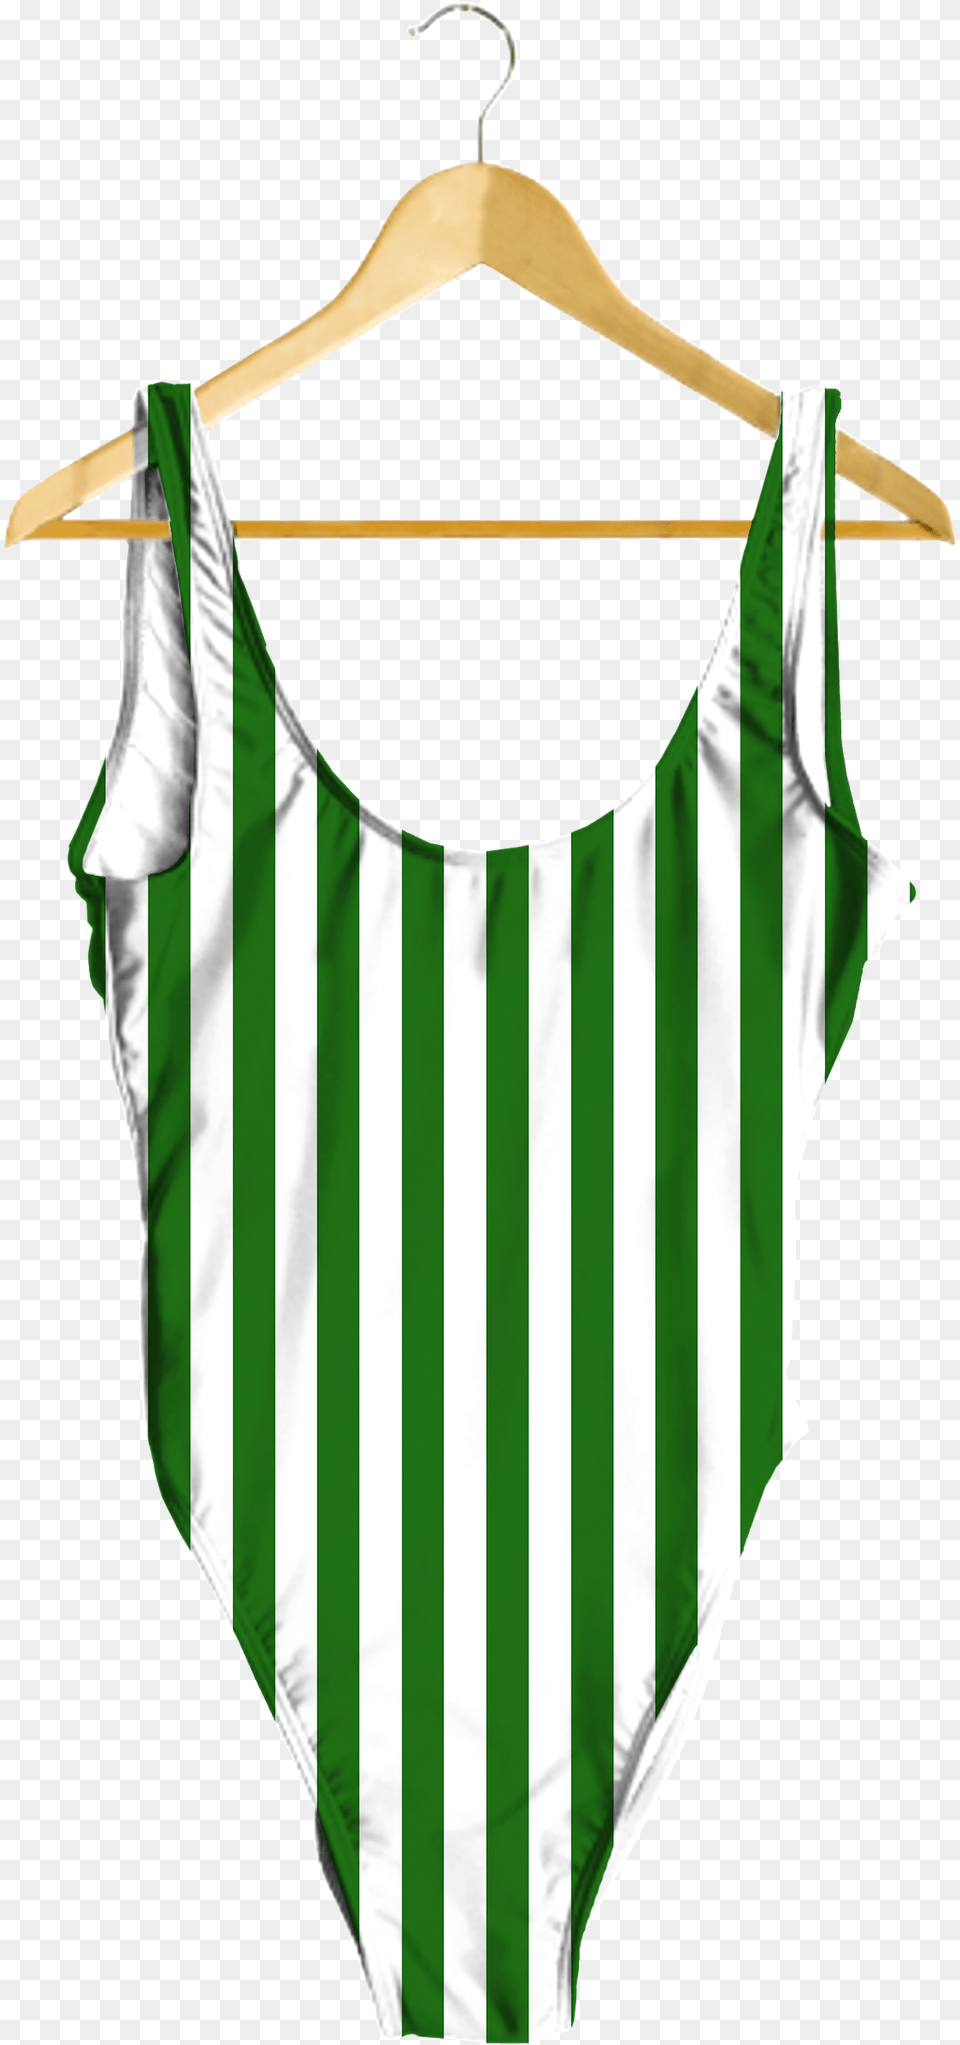 Green Amp White Striped One Piece Green And White Striped One Piece Swimsuit, Blouse, Clothing, Coat Free Transparent Png